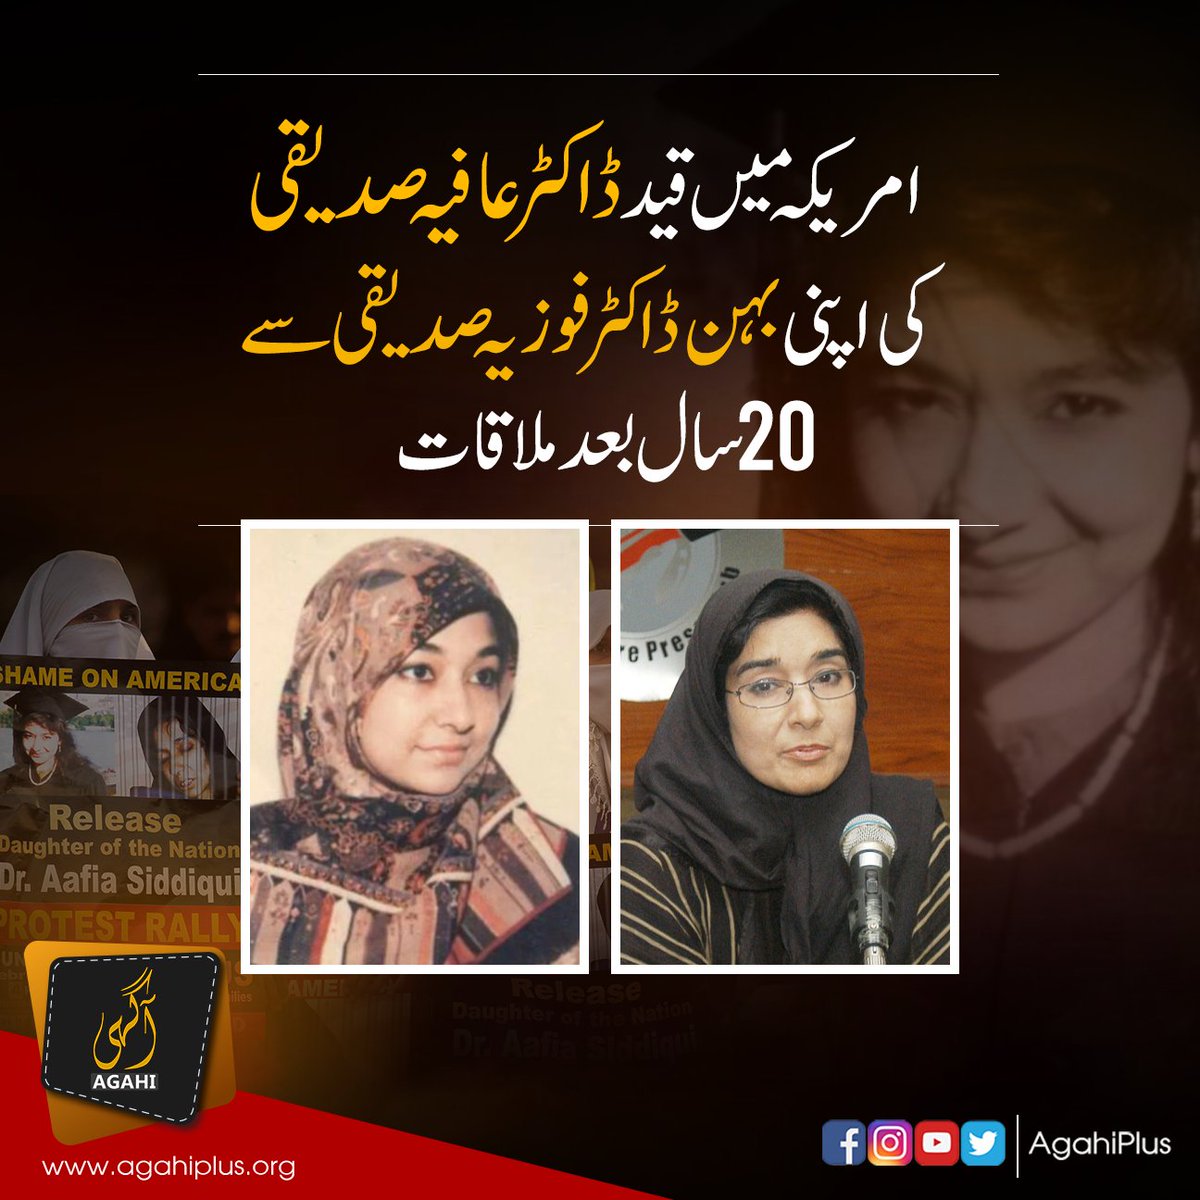 Salute to the courage of Senator  Mushtaq Ahmad Khan ❤️ for fighting with courage, tact and persistence for the release of Dr. Aafia Siddiqui.
#ڈاکٹرعافیہ_کو_رہاکرواؤ
#ڈاکٹرعافیہ_کوپاکستان_لاؤ